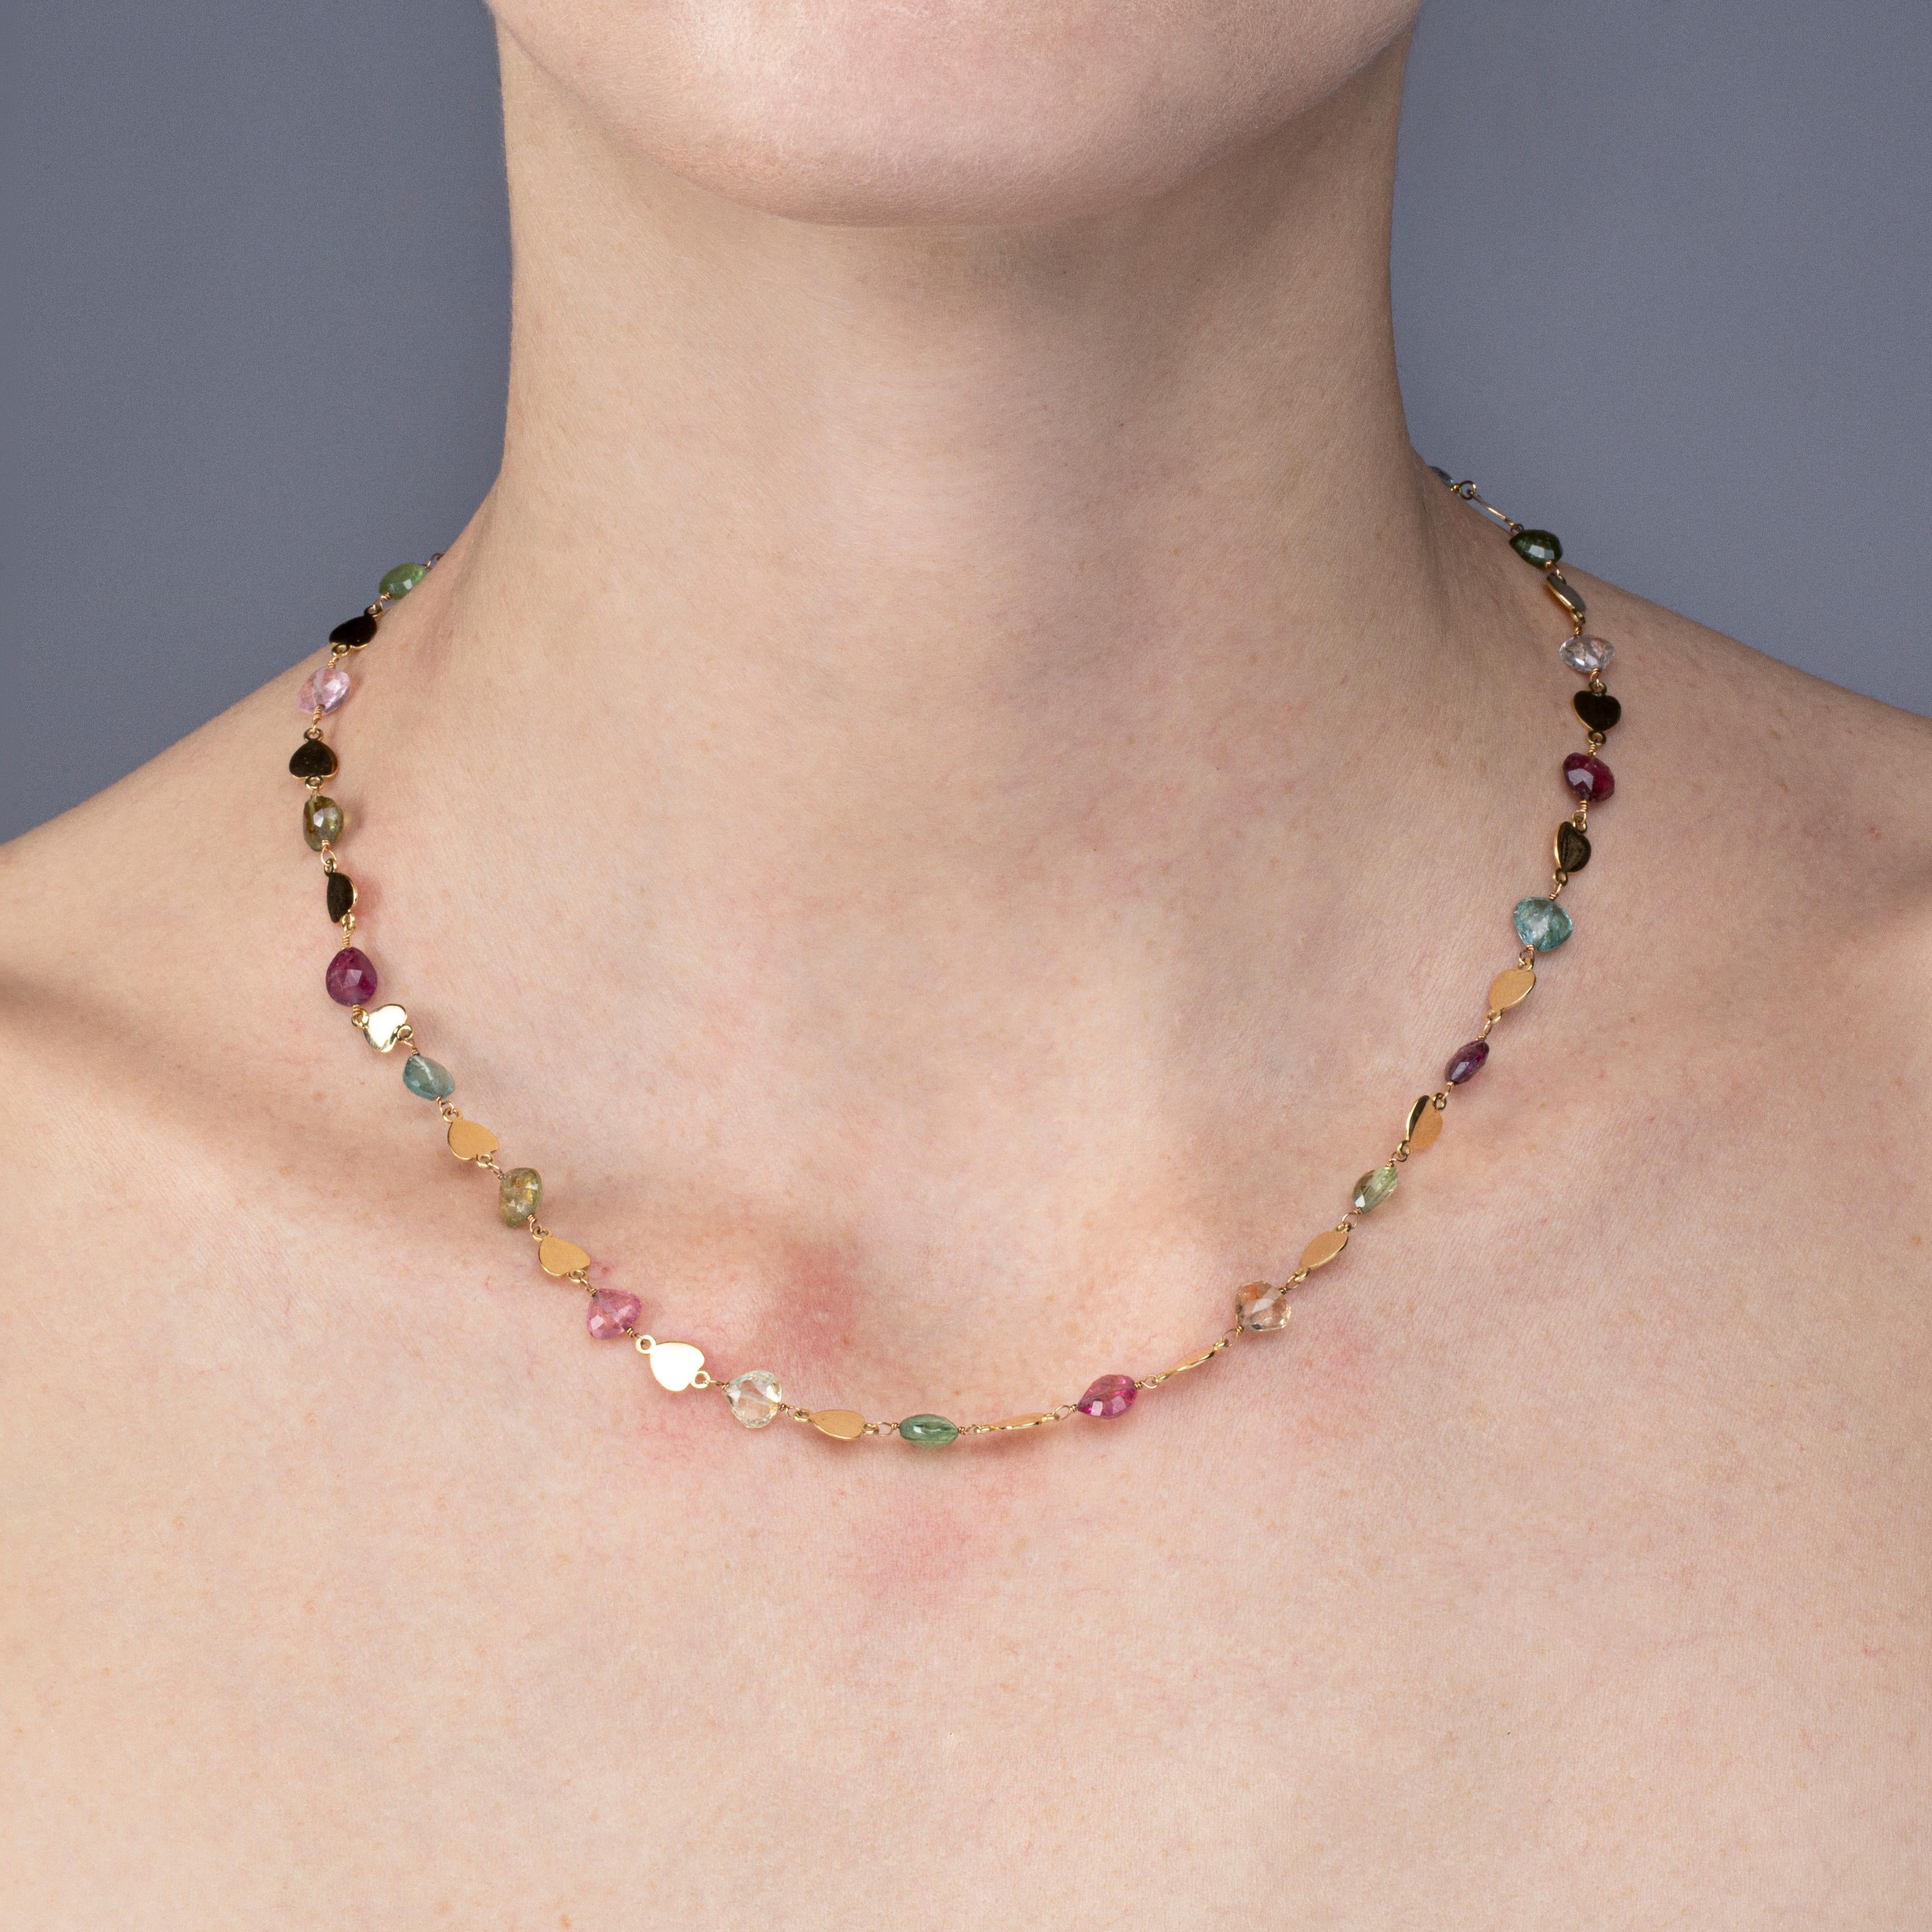 Alex Jona design collection, hand crafted in Italy, 18 karat yellow gold necklace, alternating heart shape multicolor faceted tourmalines with gold heart shaped links.
Alex Jona jewels stand out, not only for their special design and for the